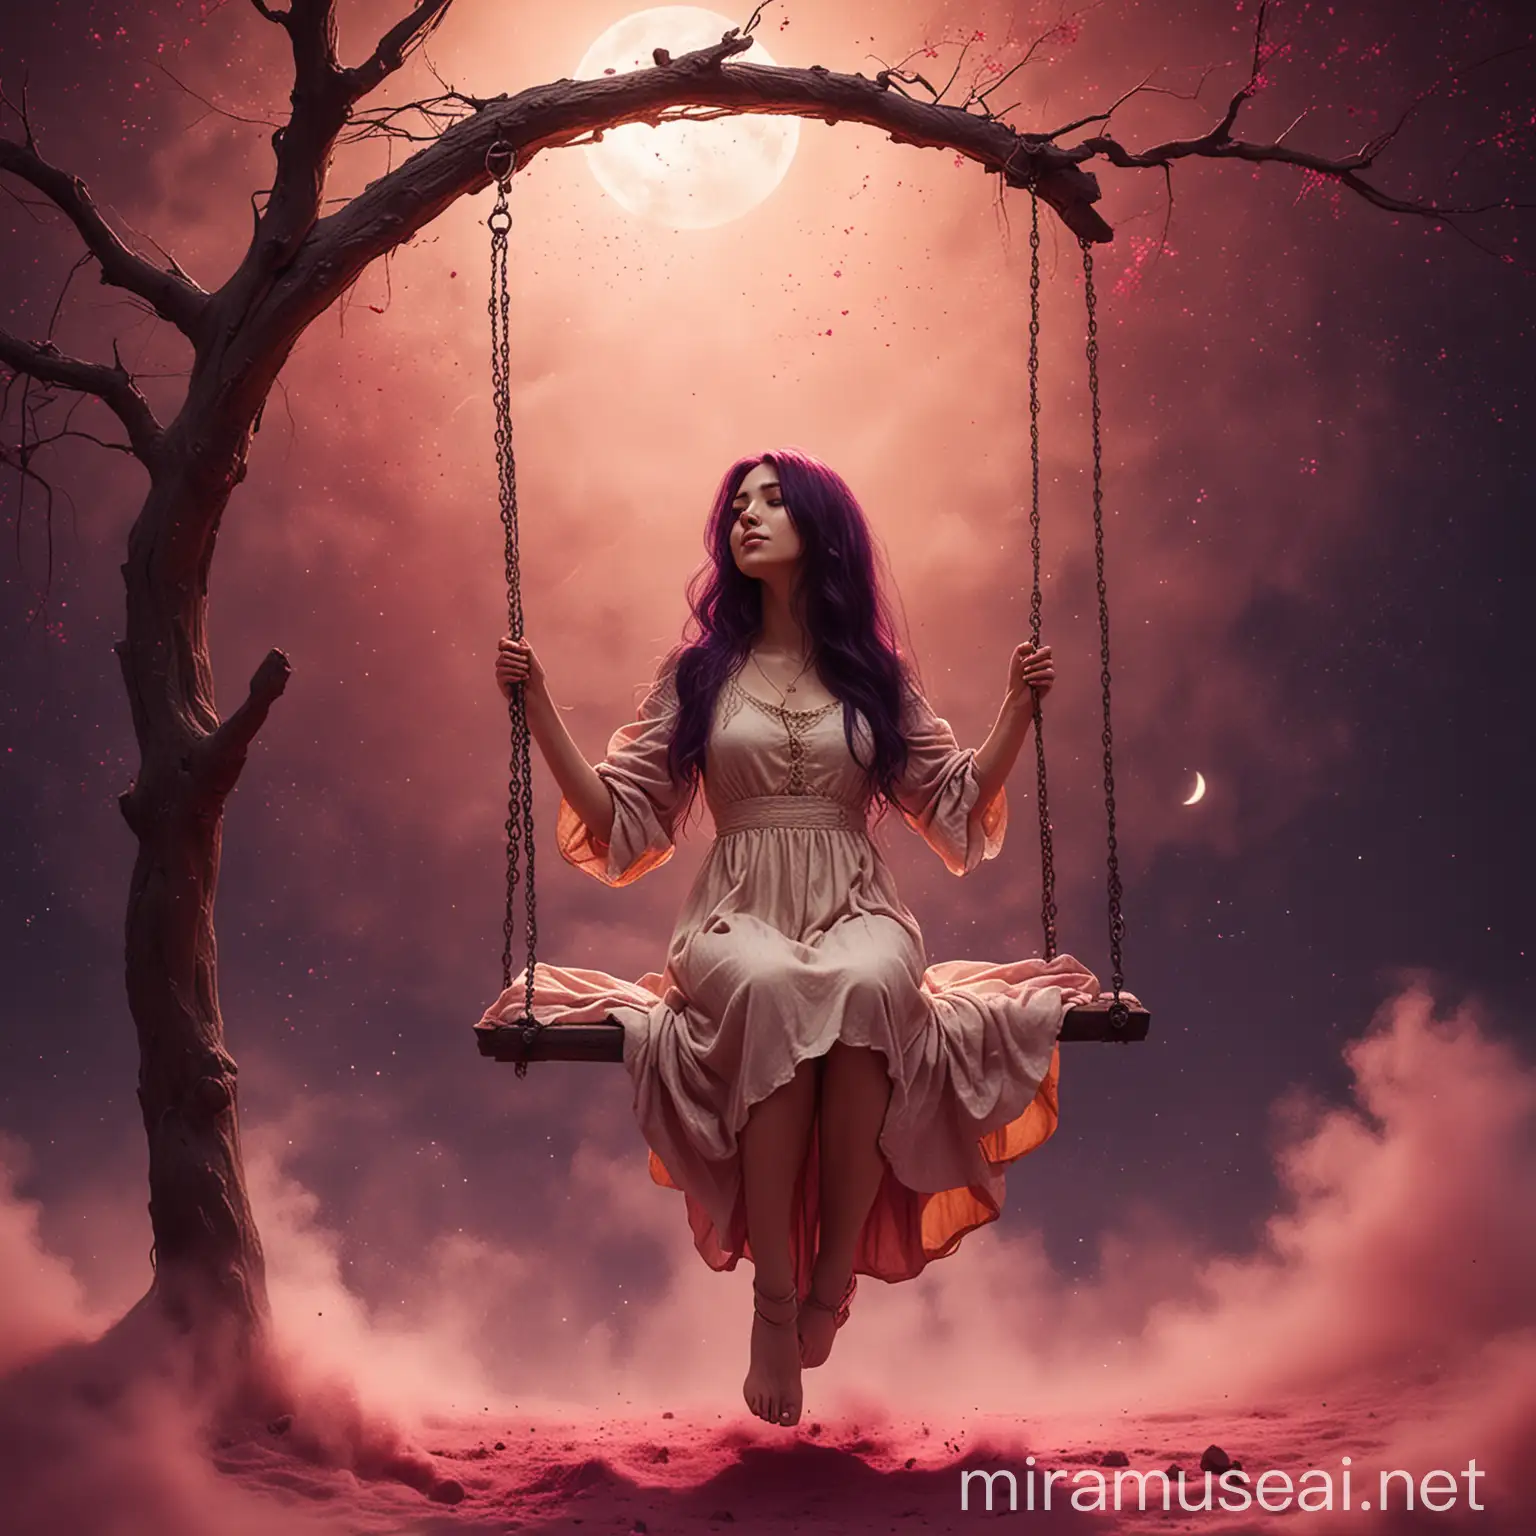 Enchanting Fantasy Woman on Swing Amidst Pink Dust and Golden Moonlight